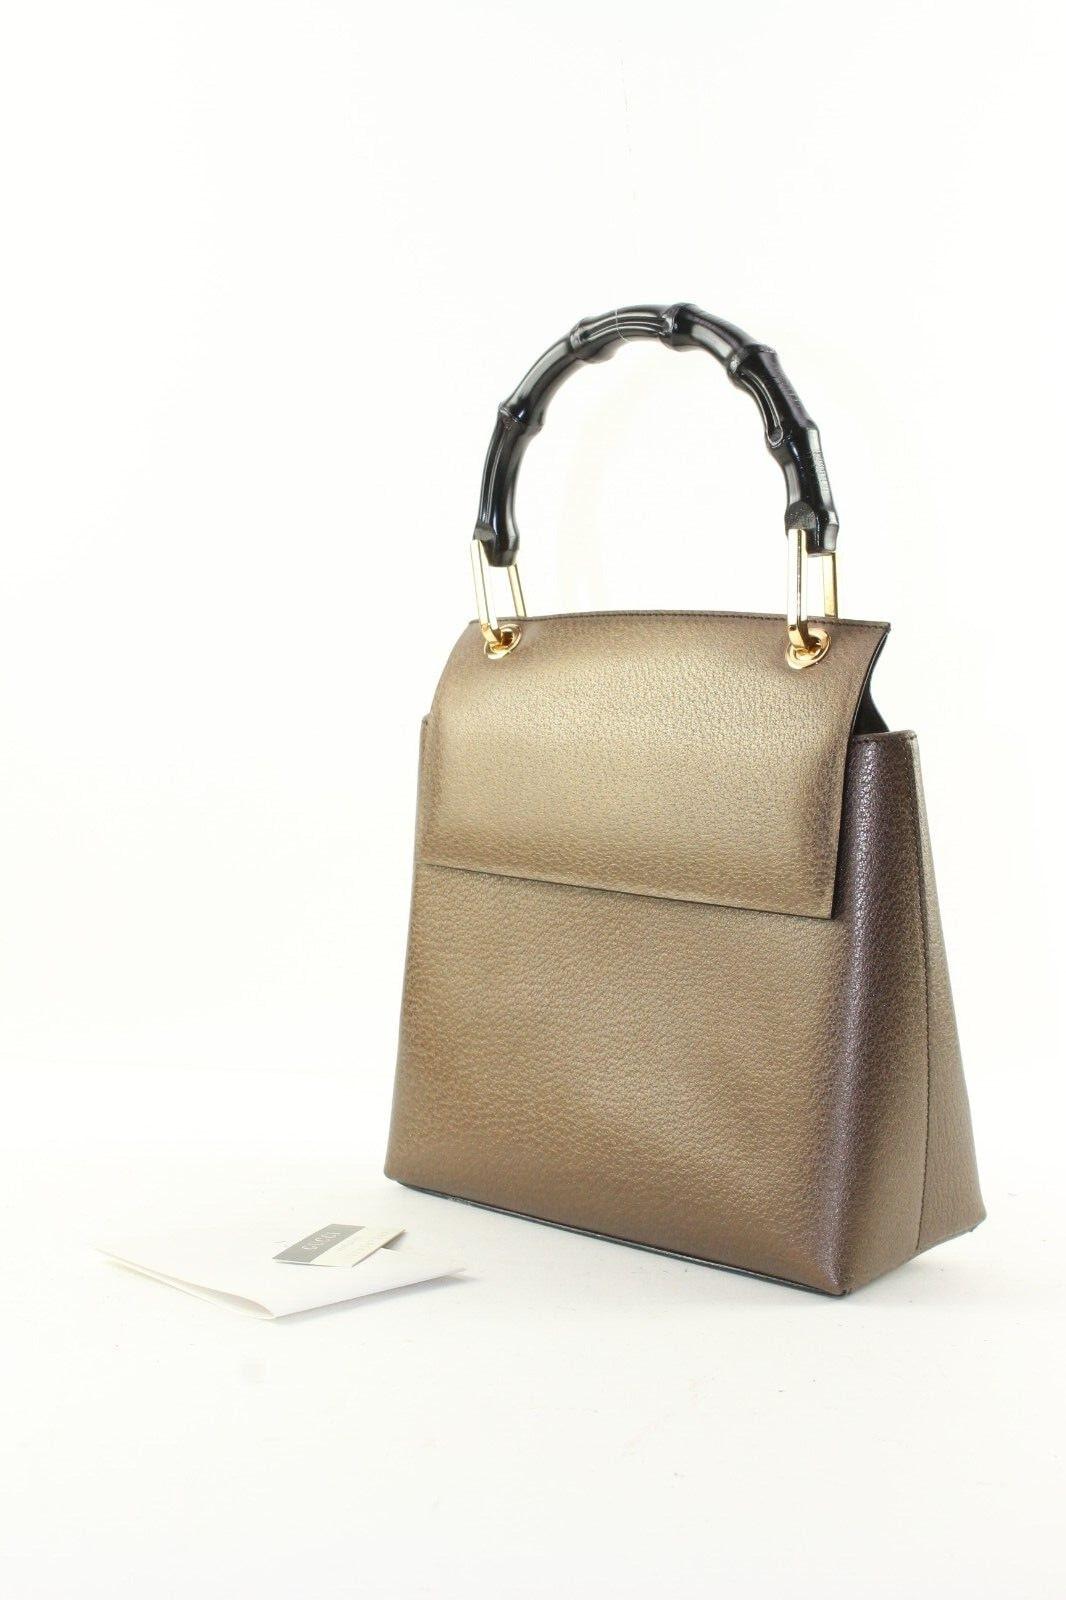 Gucci Brown Leather Bamboo Tote 3GK1214K
Date Code/Serial Number: 0011181838

Made In: Italy 

Measurements: Length:  8